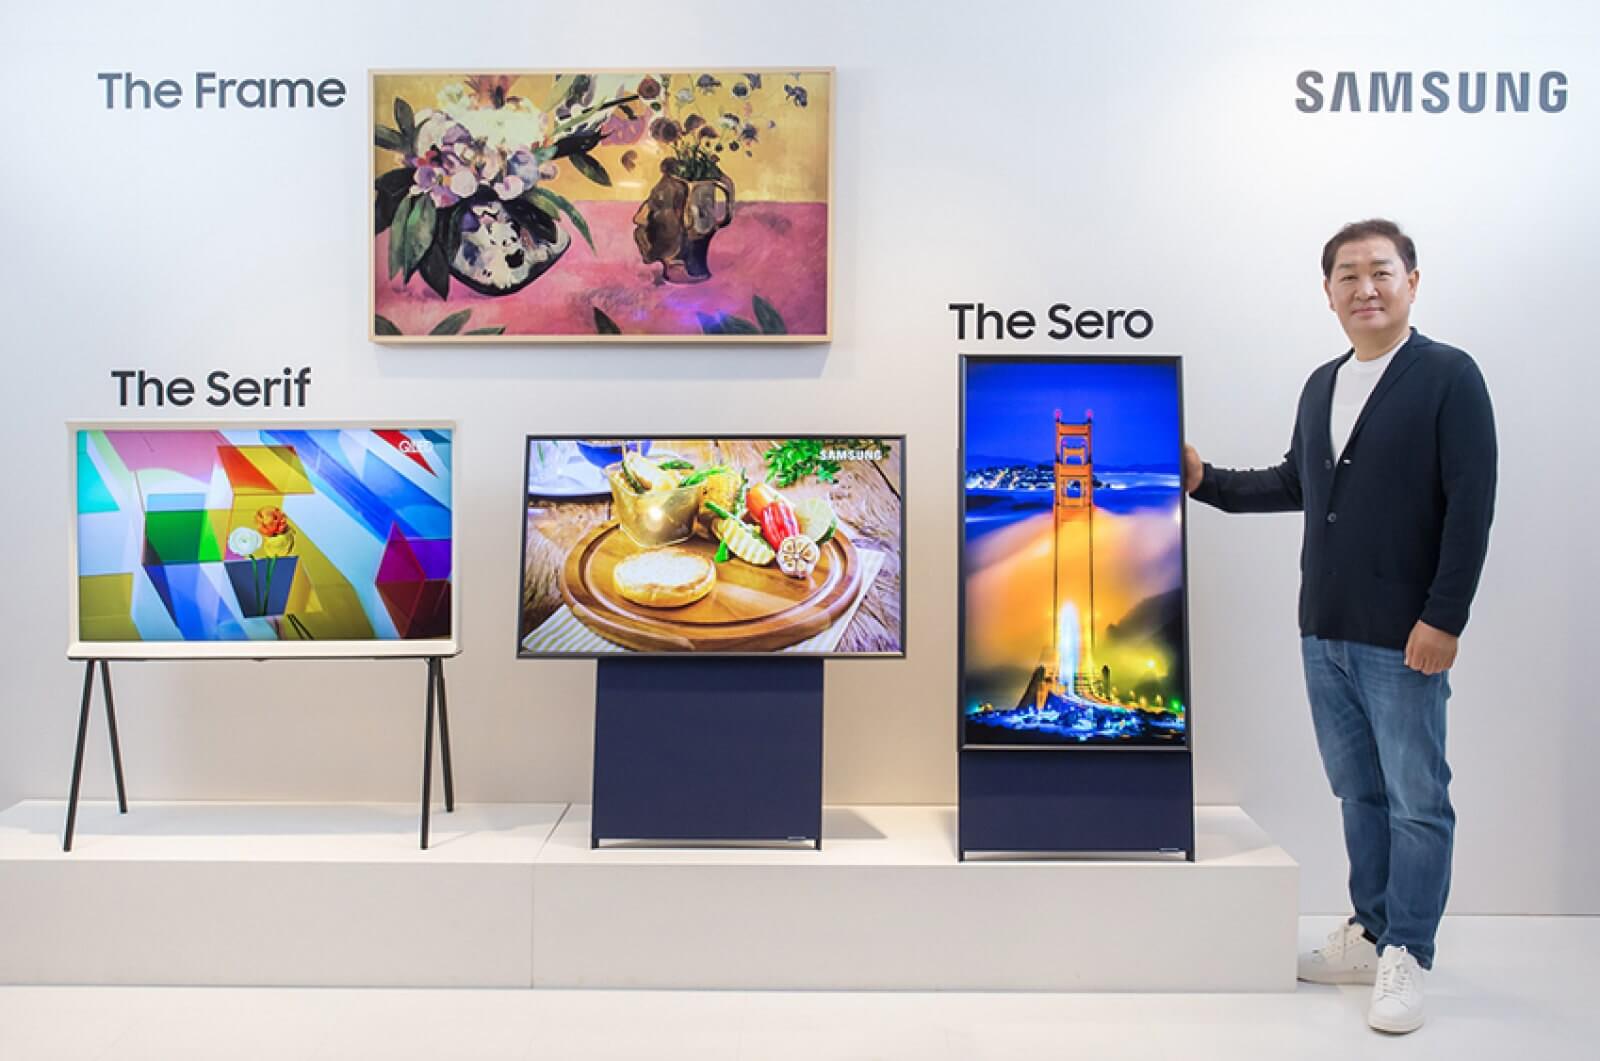 Samsung unveils TV that can flip vertically for watching smartphone content